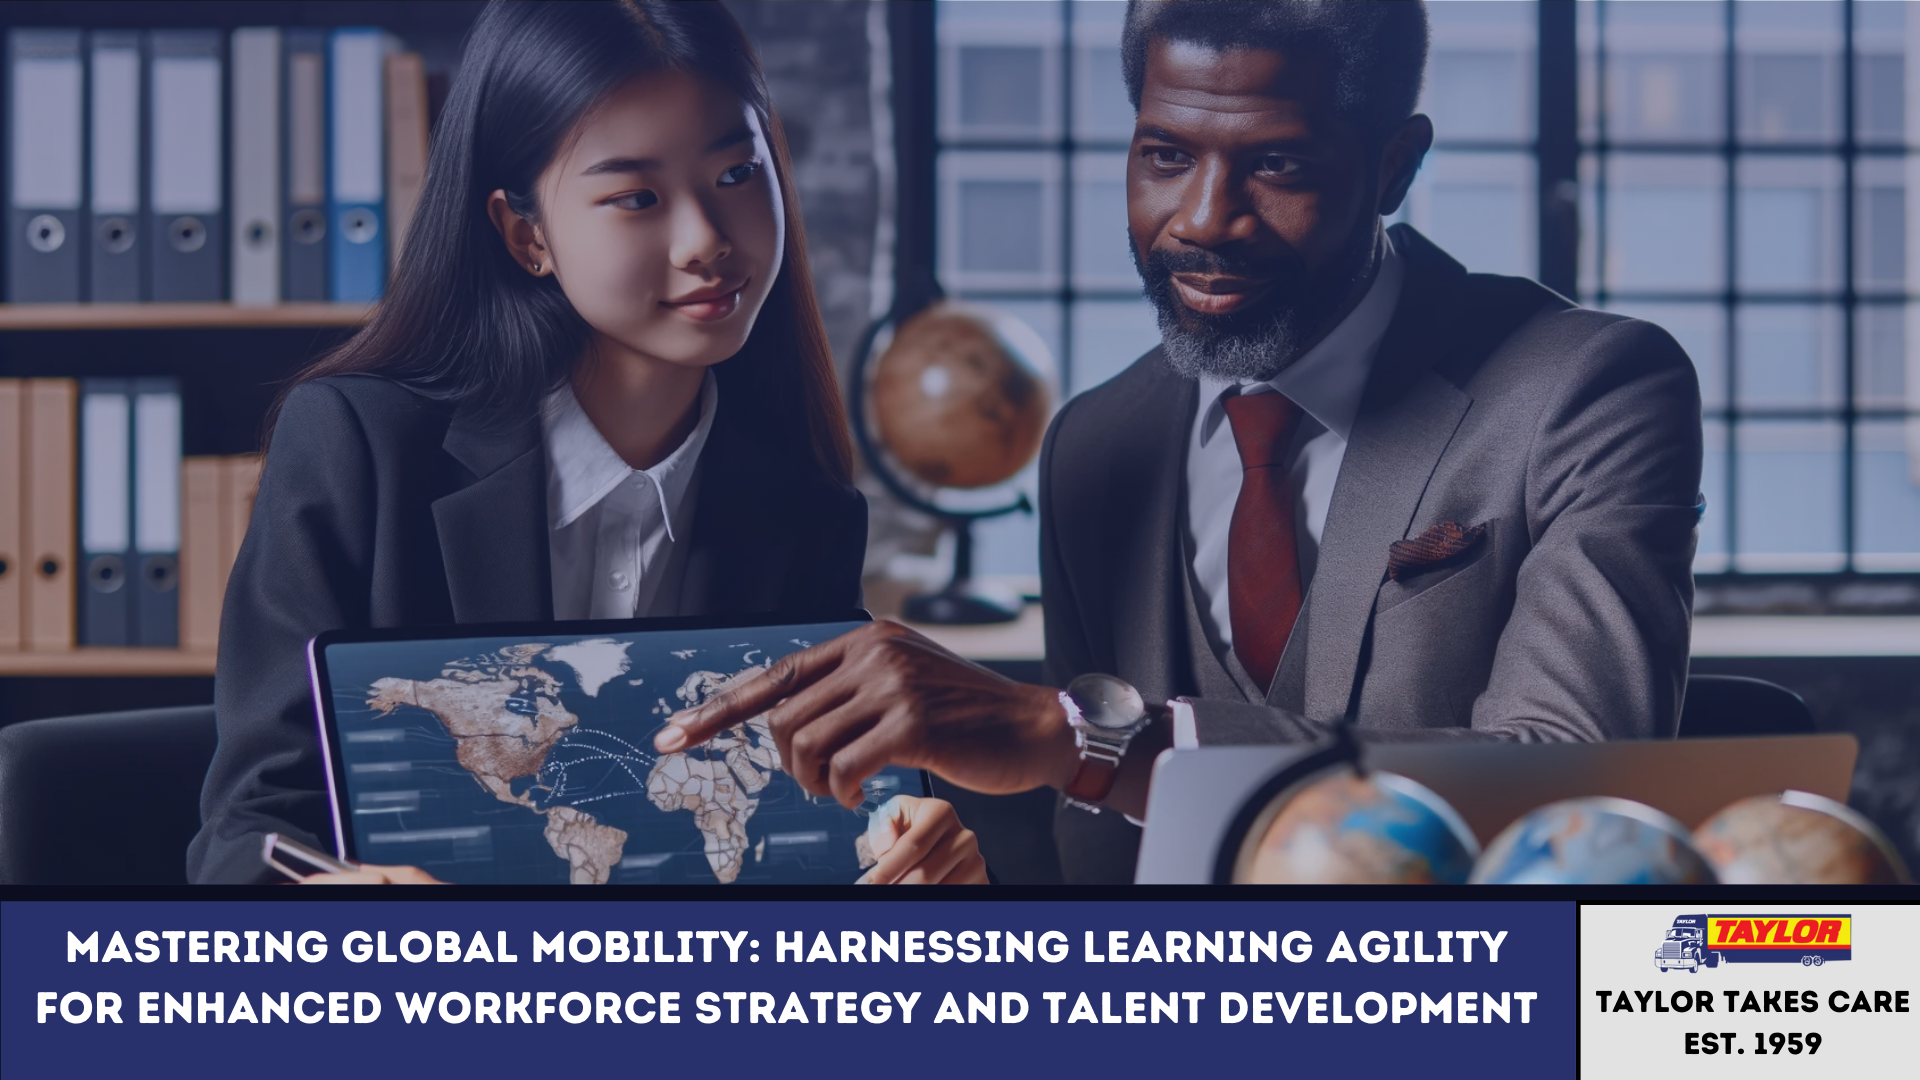 Mastering Global Mobility: Harnessing Learning Agility for Enhanced Workforce Strategy and Talent Development